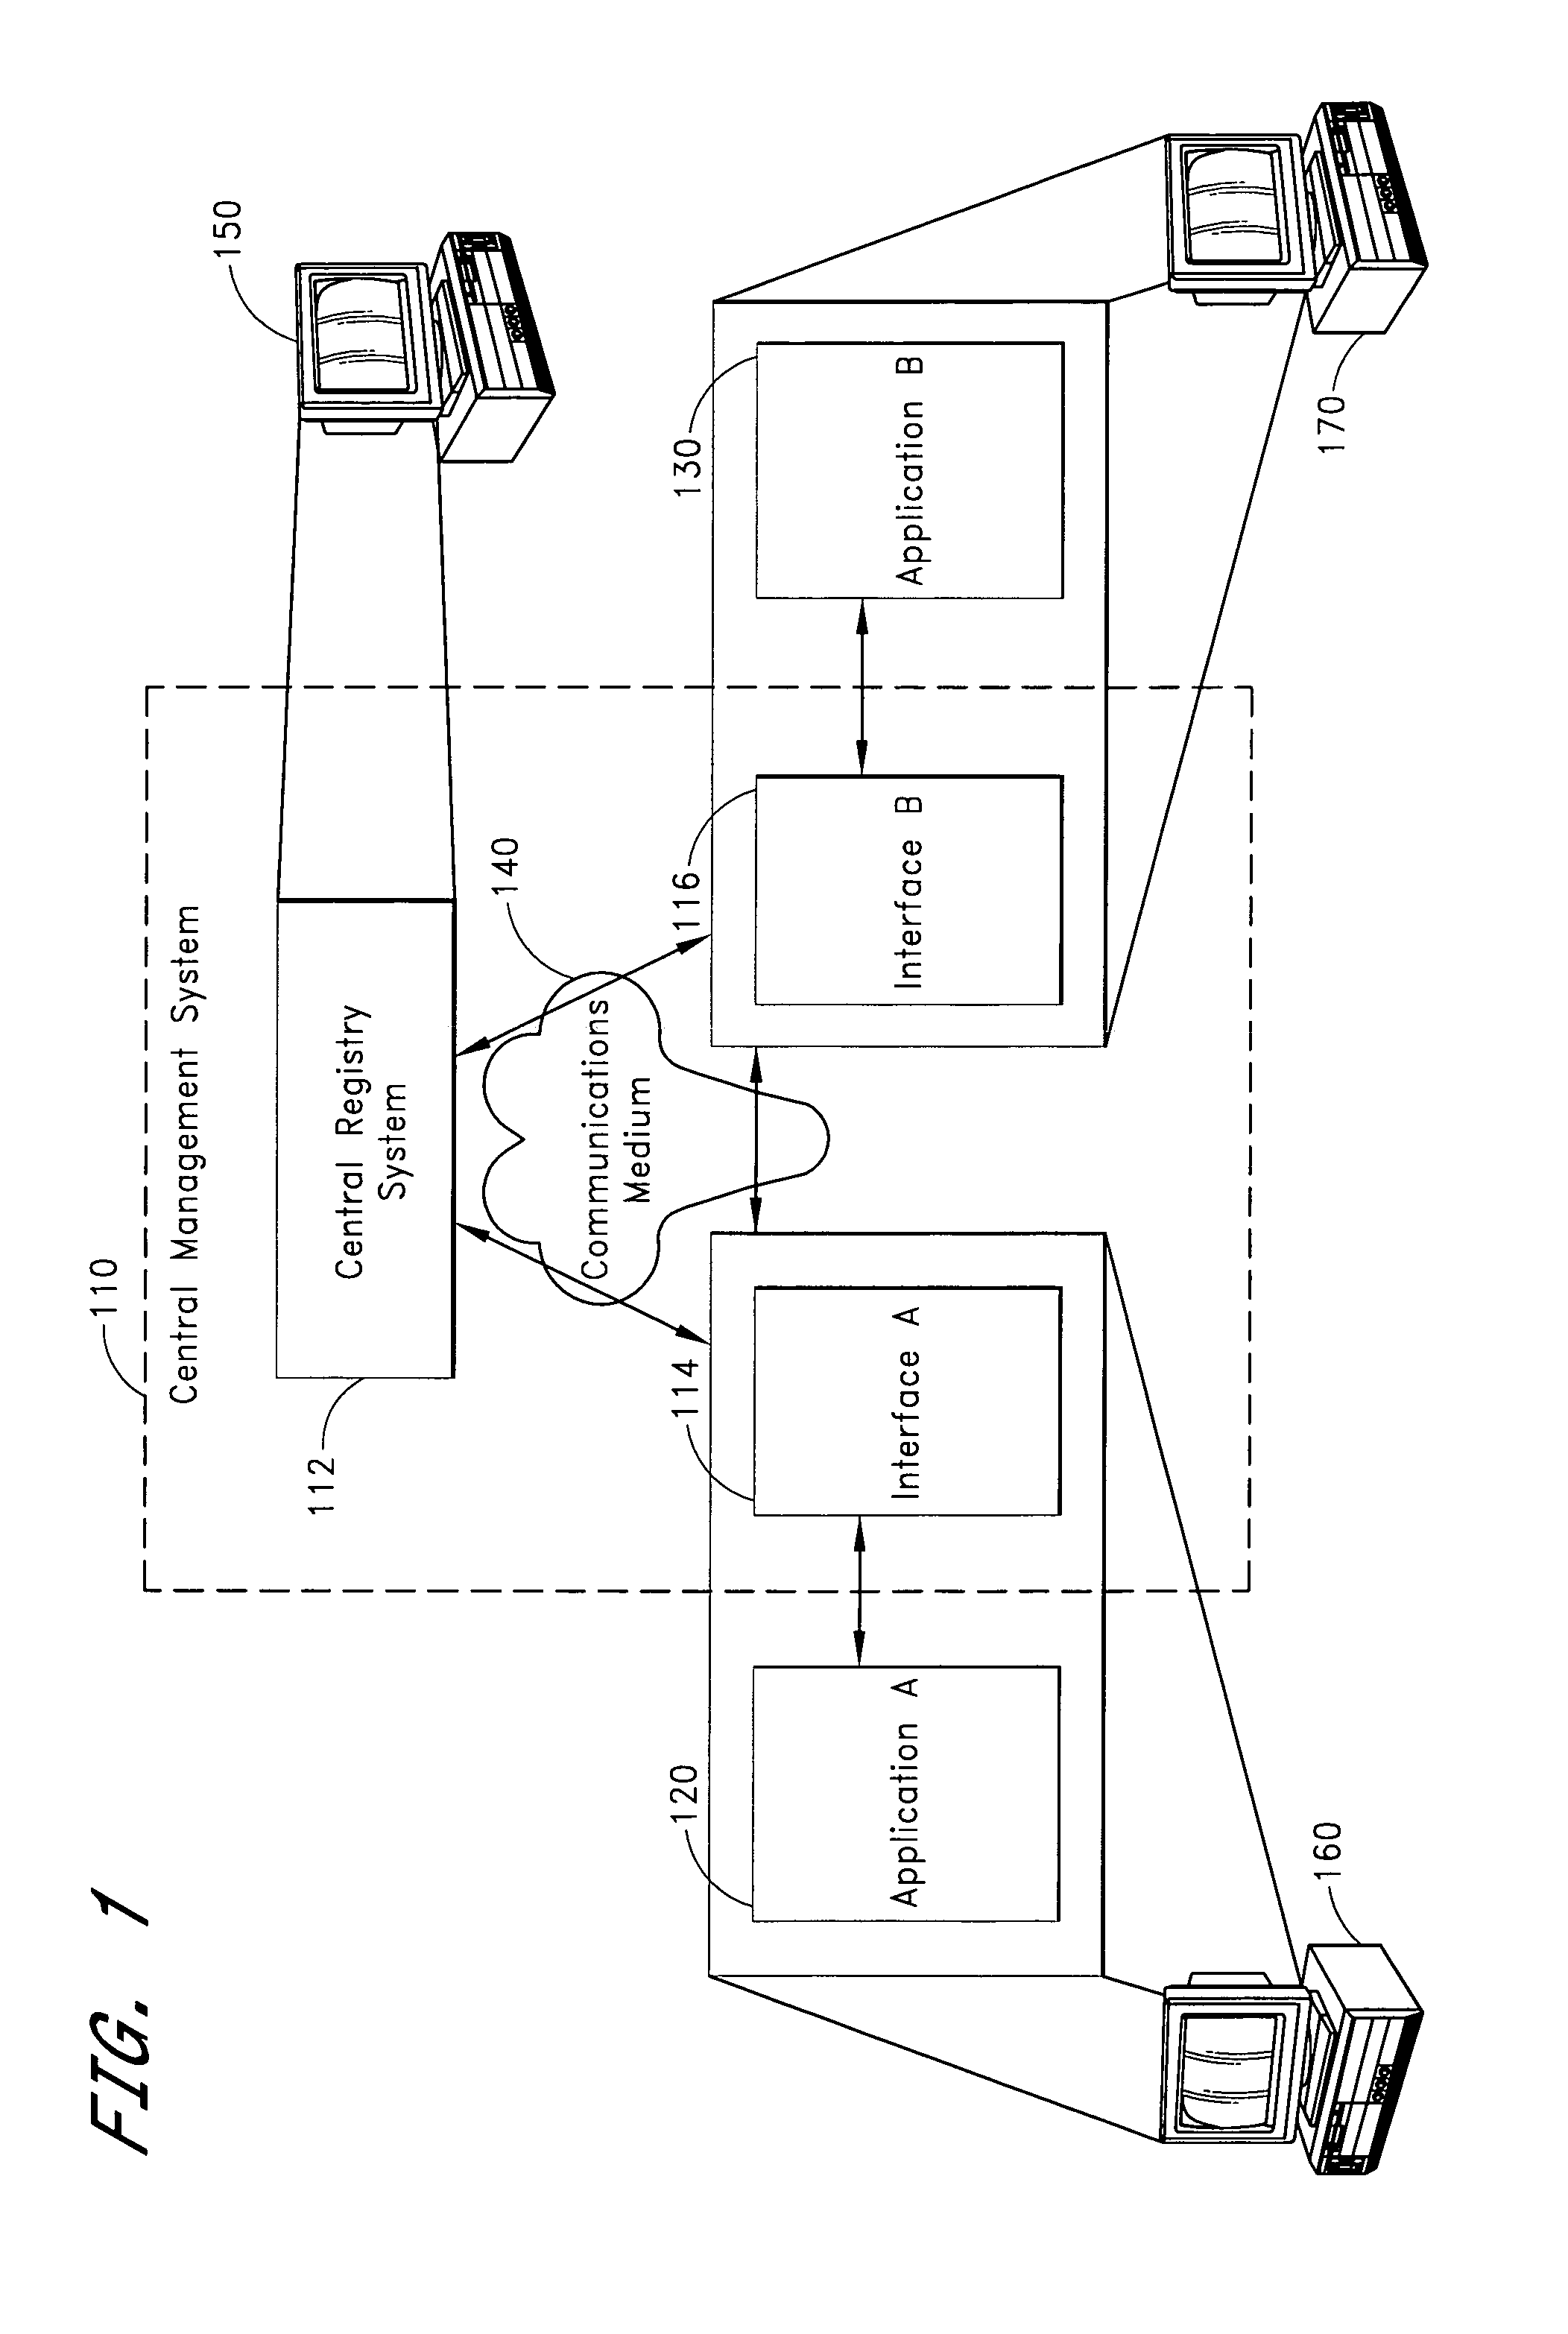 Systems and methods for providing centralized management of heterogeneous distributed enterprise application integration objects